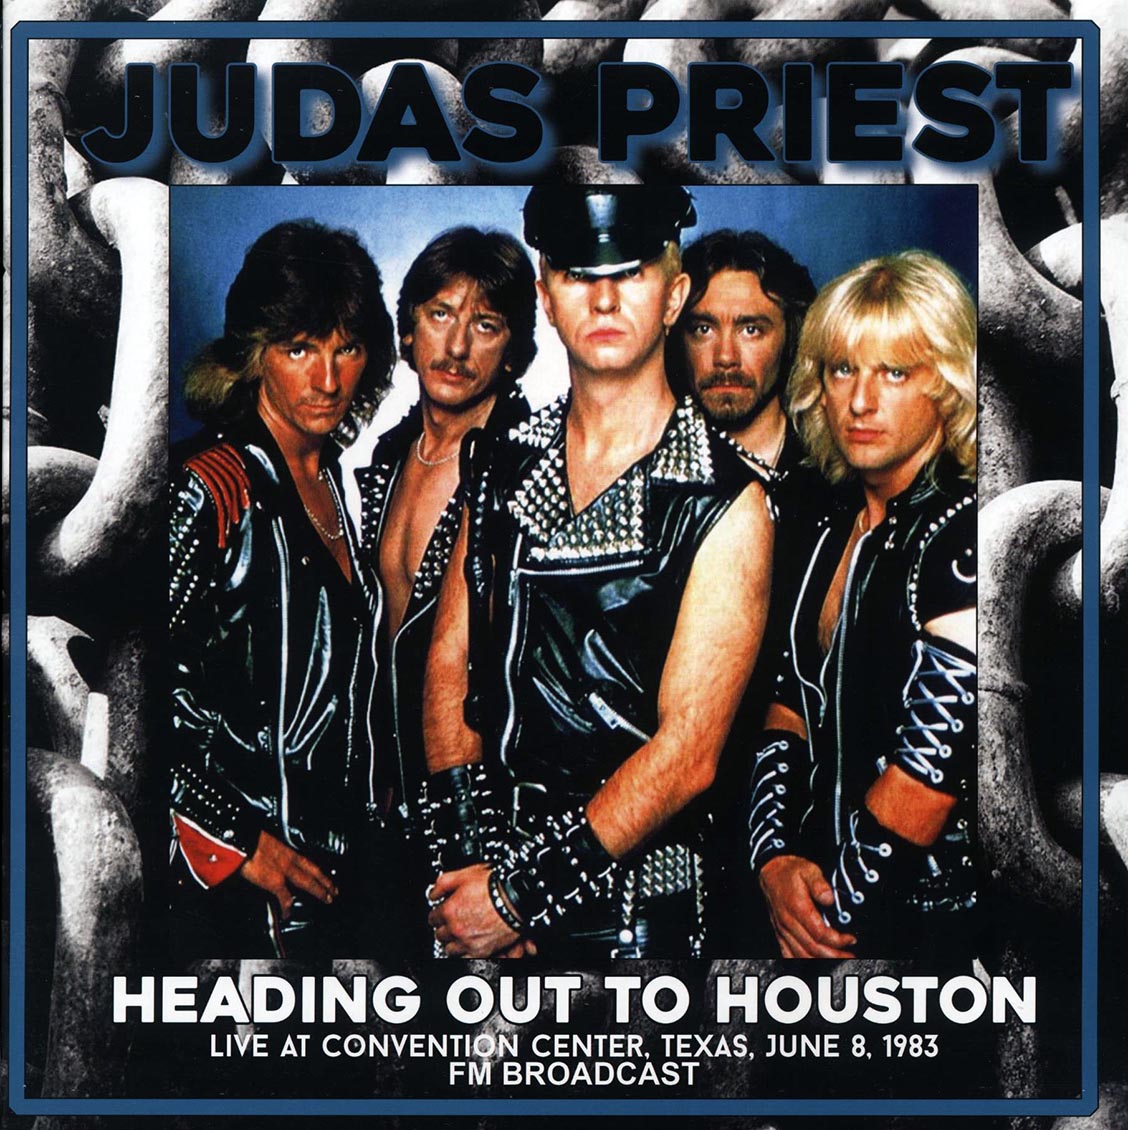 Judas Priest - Heading Out to Houston [2022 Unofficial] [New Vinyl Record LP]